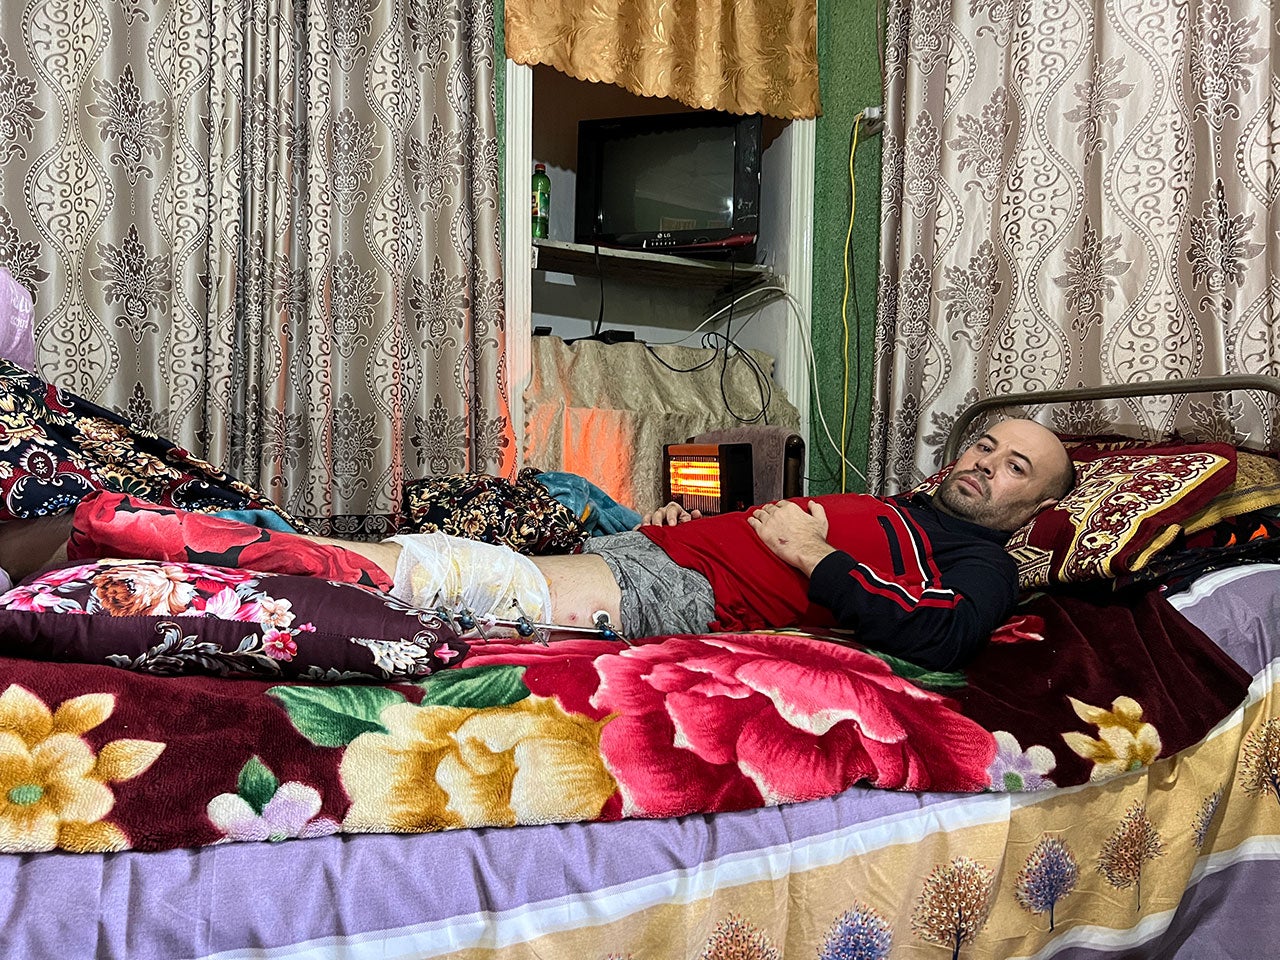 Shahriyor Khasanov, a 39-year-old shop owner who survived a Kyrgyz drone attack in Ovchi Kal’acha, said he was hit by metal fragments in the stomach and his leg was “almost separated” from his body.